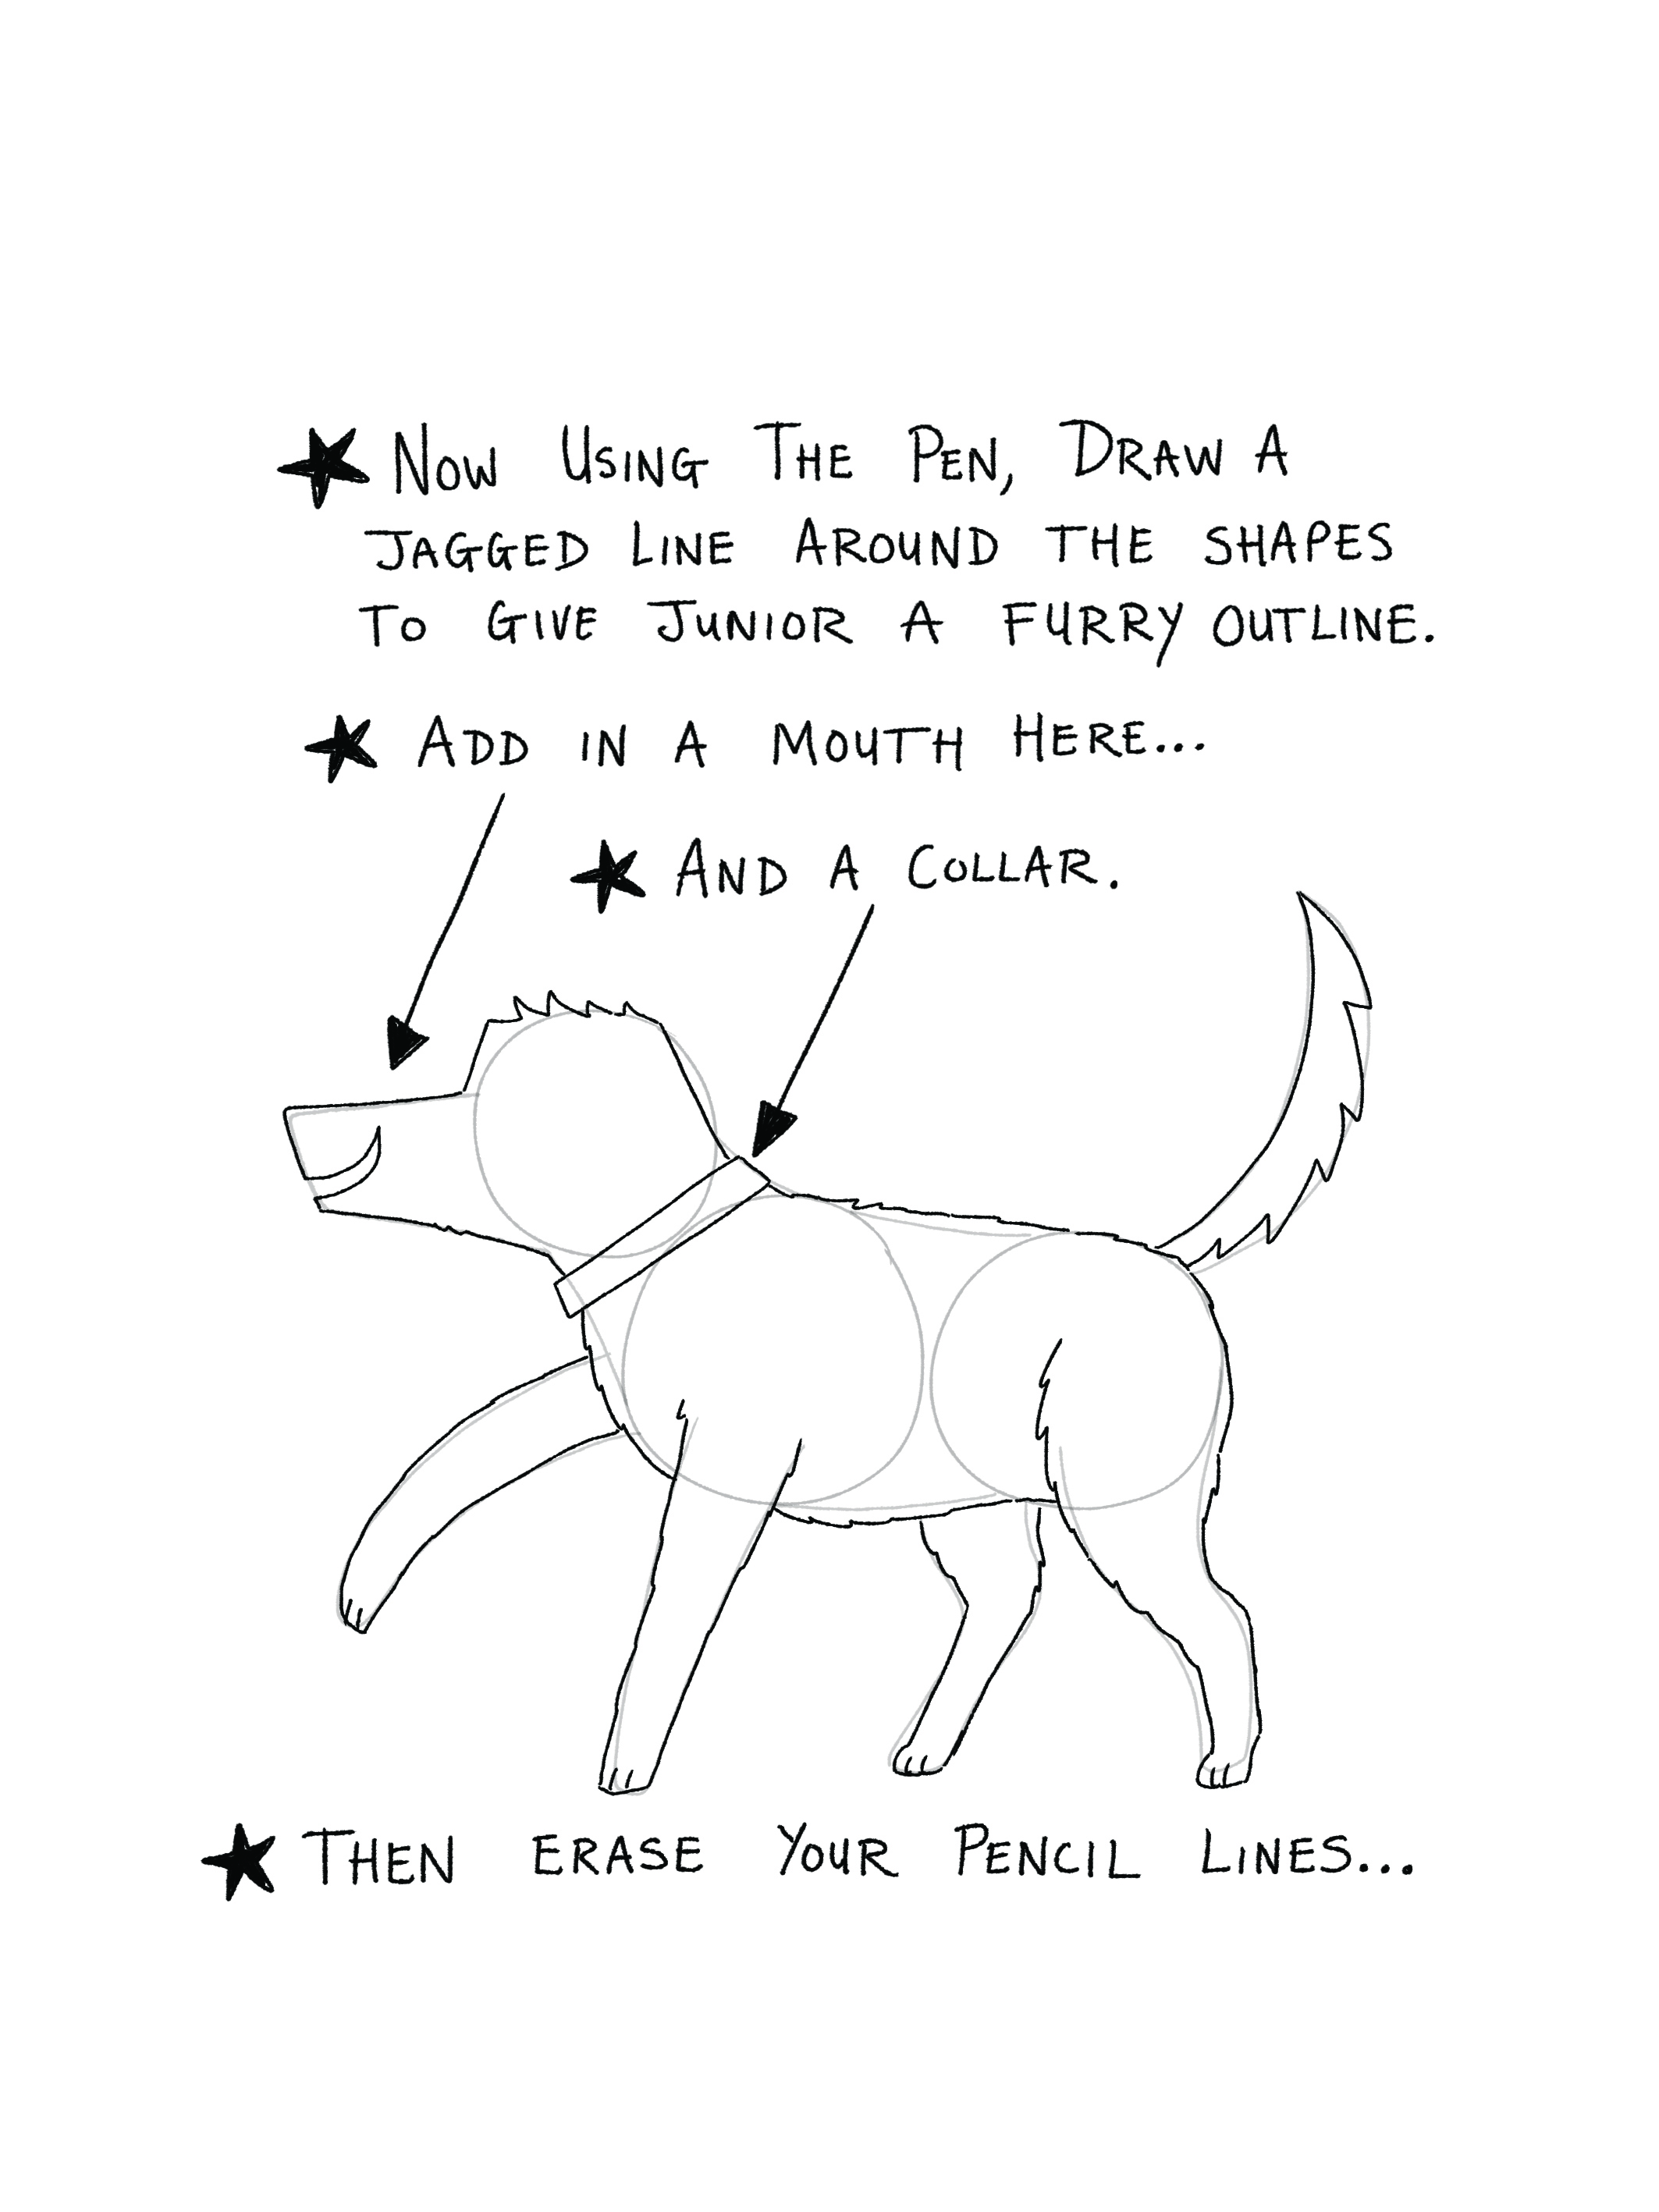 How to draw a dog in 5 easy steps